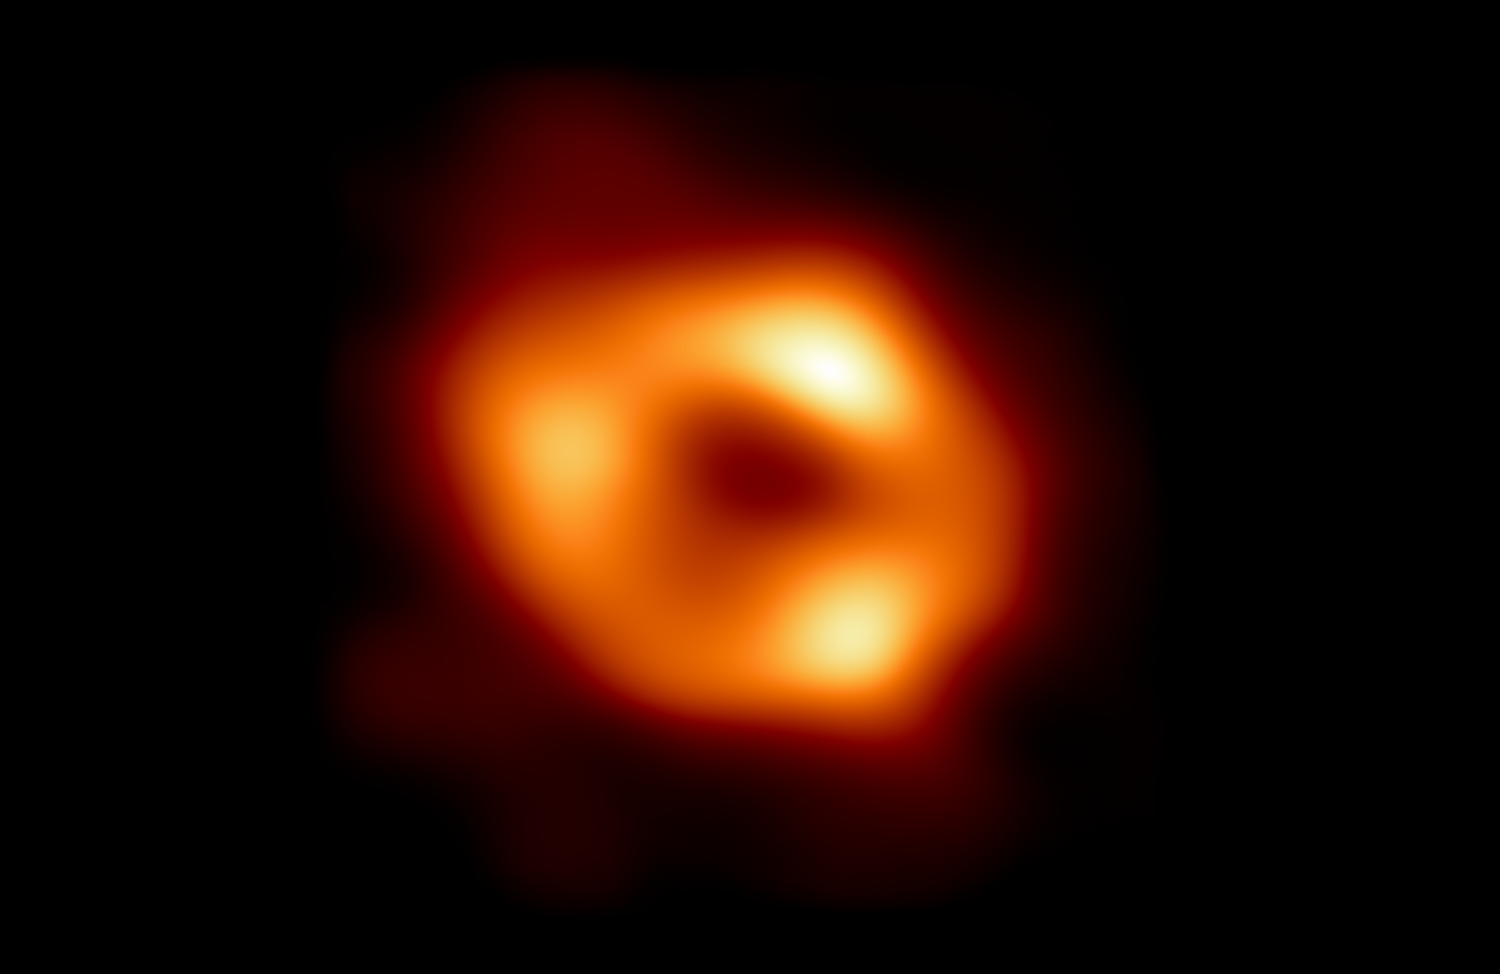 a glowing ring that looks a bit like an orange donut. this ring represents the gas orbiting around the black hole